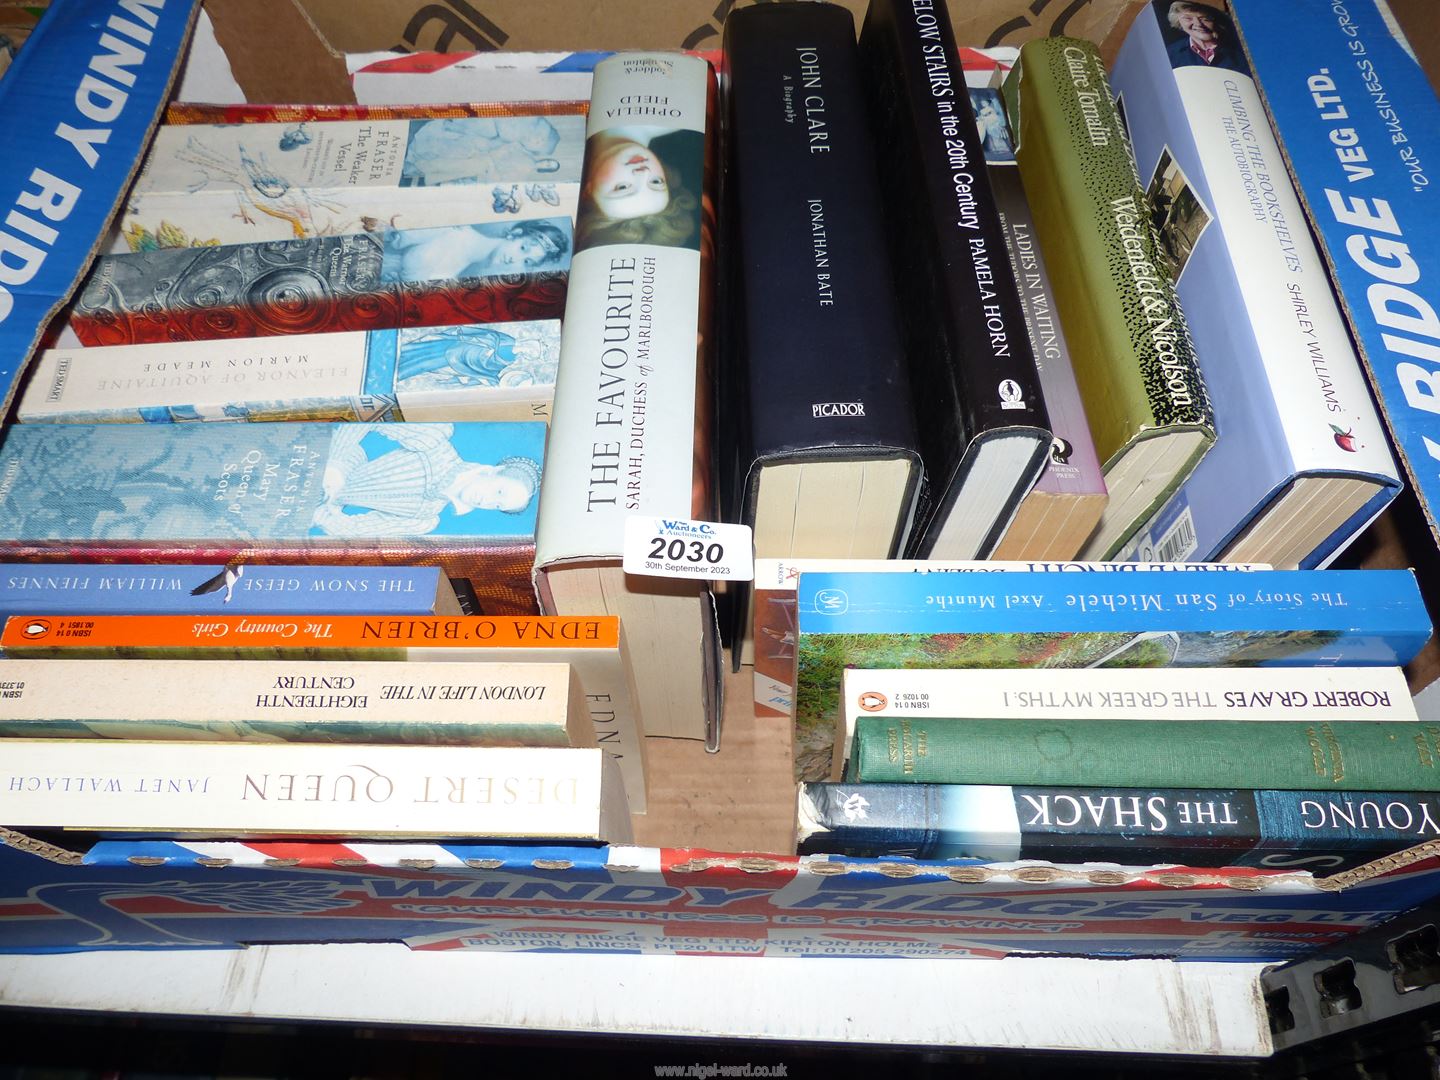 A box of books to include; Marion Meade, Dessert Queen by Janet Wallach, John Clare Biography, etc.